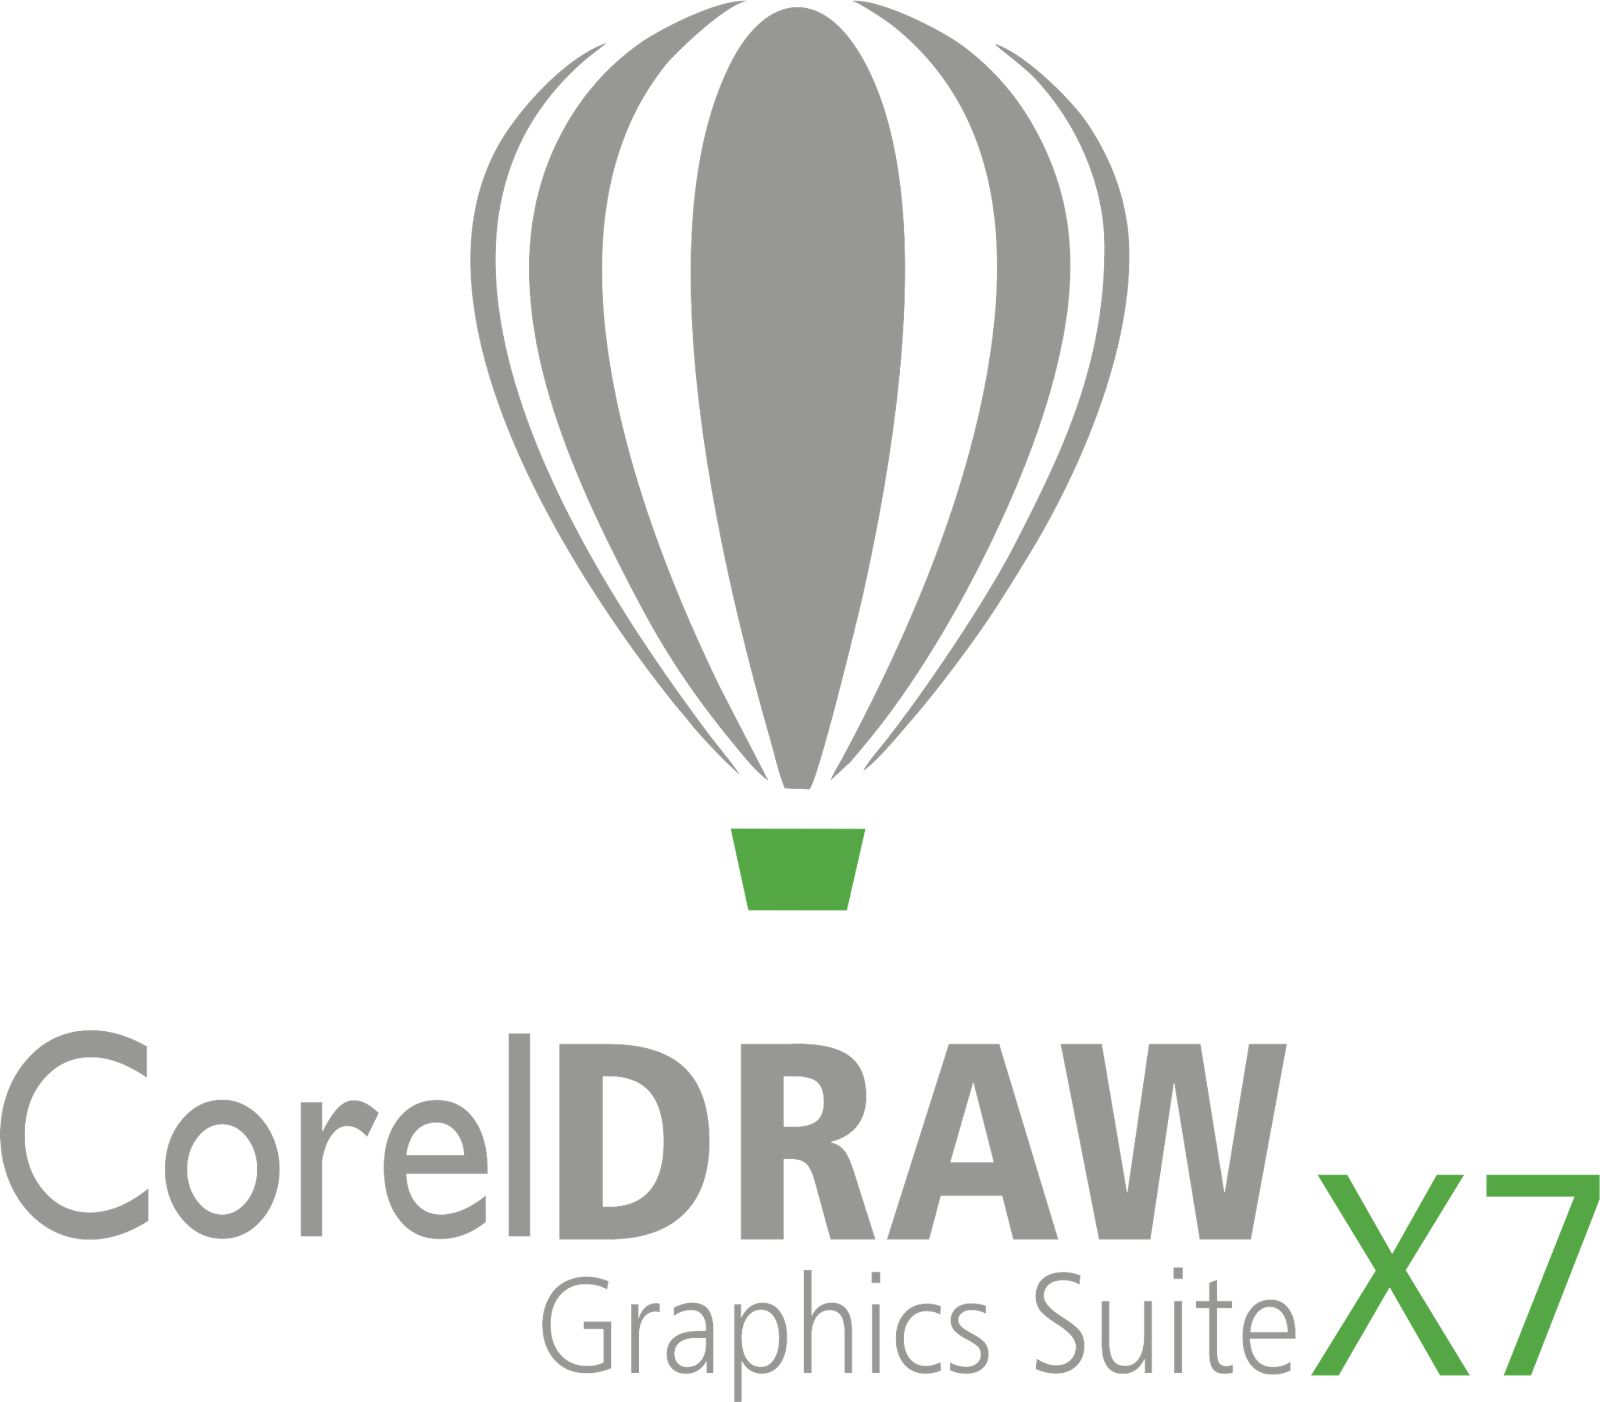 CorelDRAW Graphics Suite X7 Free Download Full Version For Windows